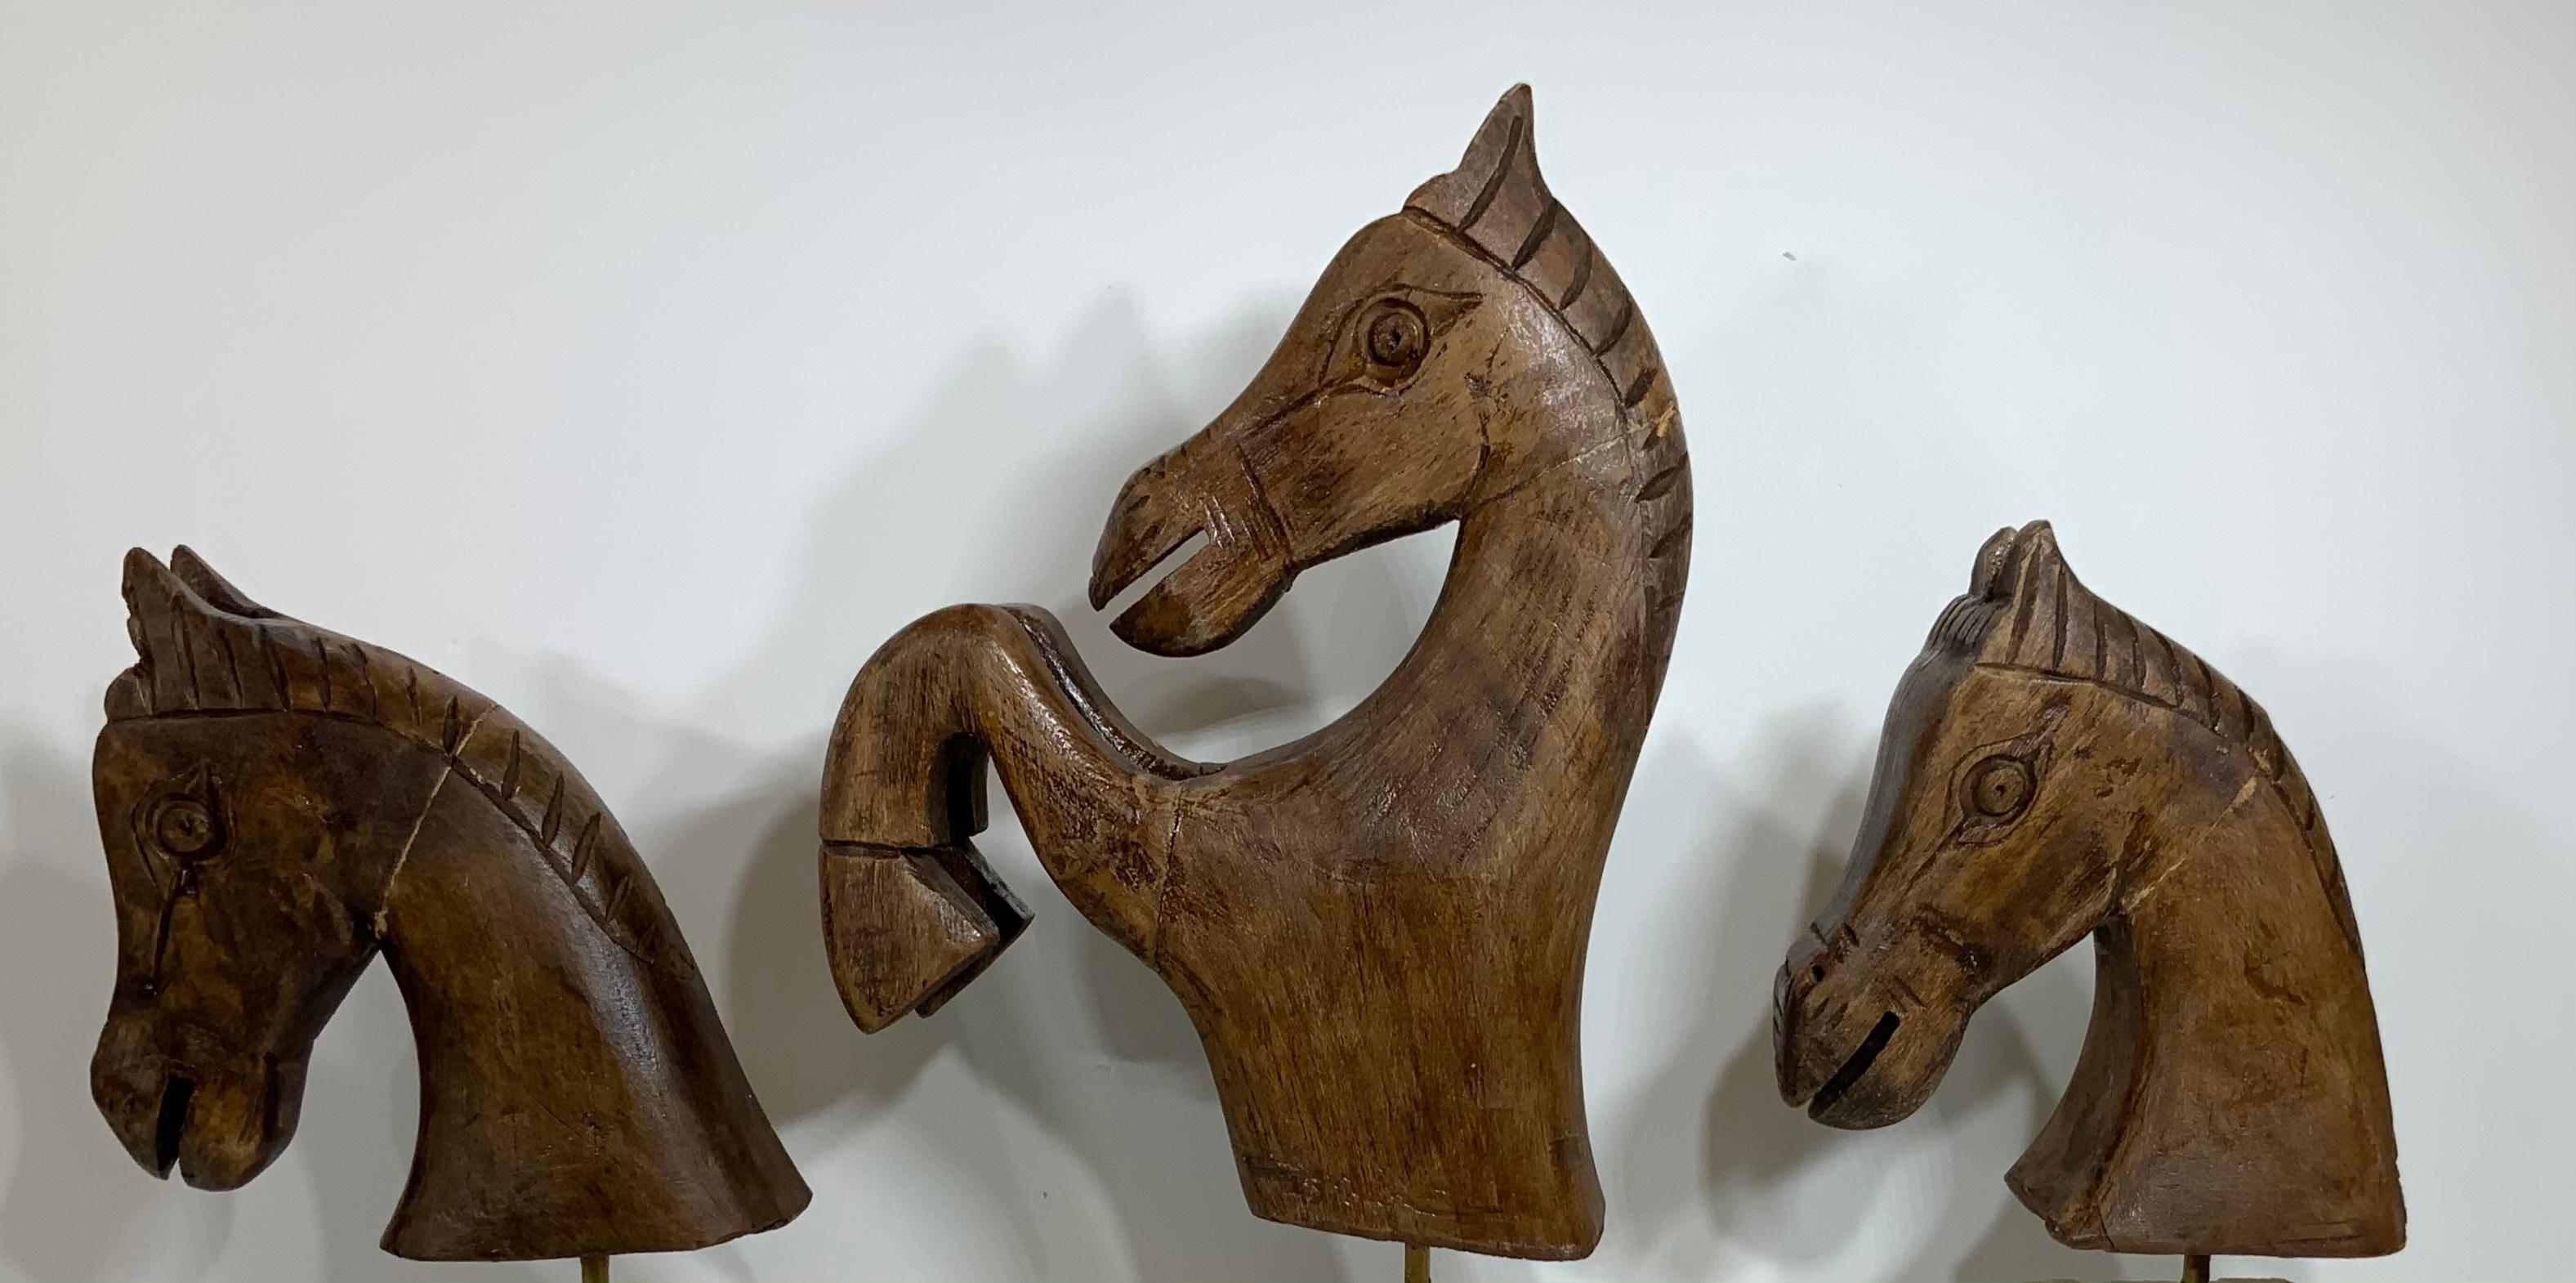 Funky three horse heads hand carved from solid wood, professionally mounted on original natural 
See coral base, great decorative items for room display for horse lovers.
Sizes:
3”wide x 7”.5 deep x 14”.5 high
3” wide x 5” deep x 11” high
3”